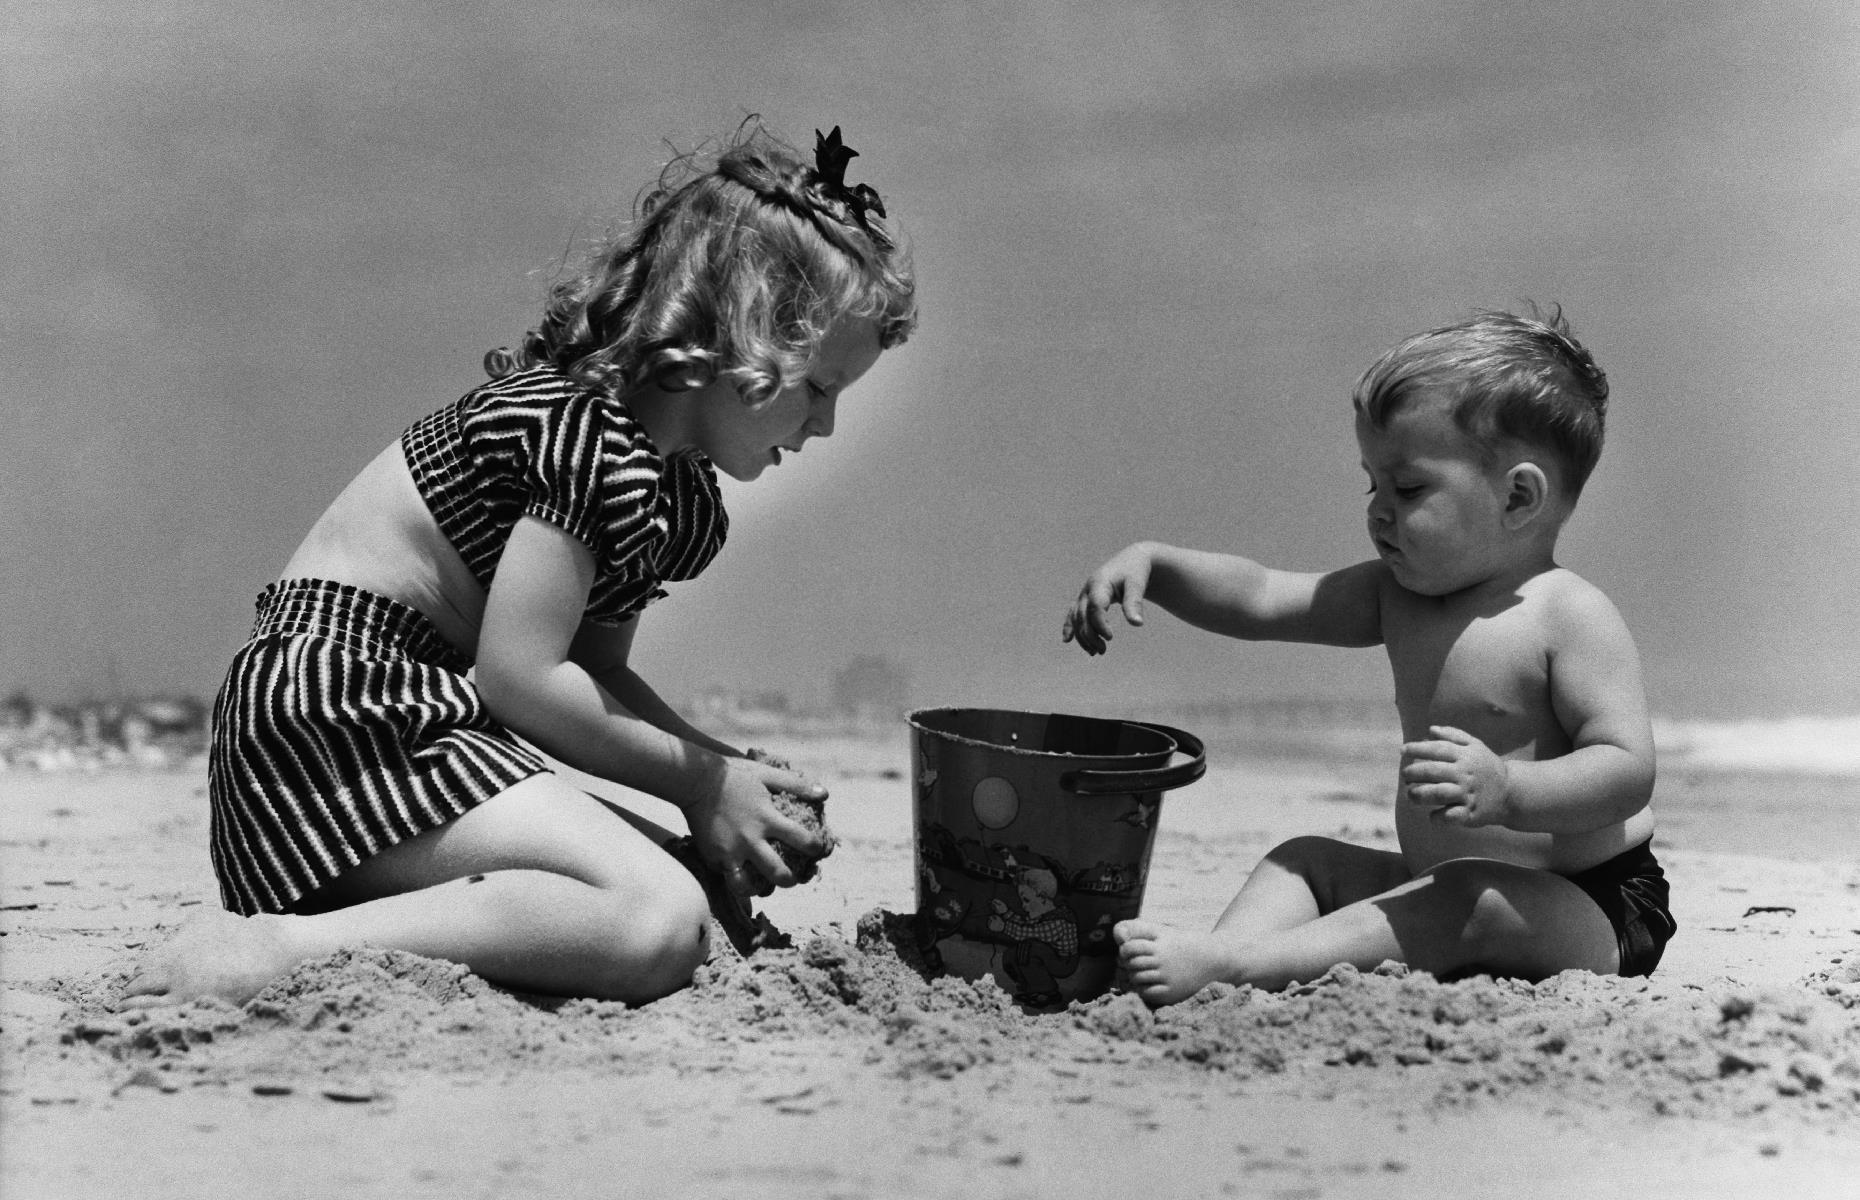 These little beach bums are handy with a bucket and spade too. This heartwarming photograph shows a brother and sister team creating a sandy masterpiece on a Florida beach in 1943.